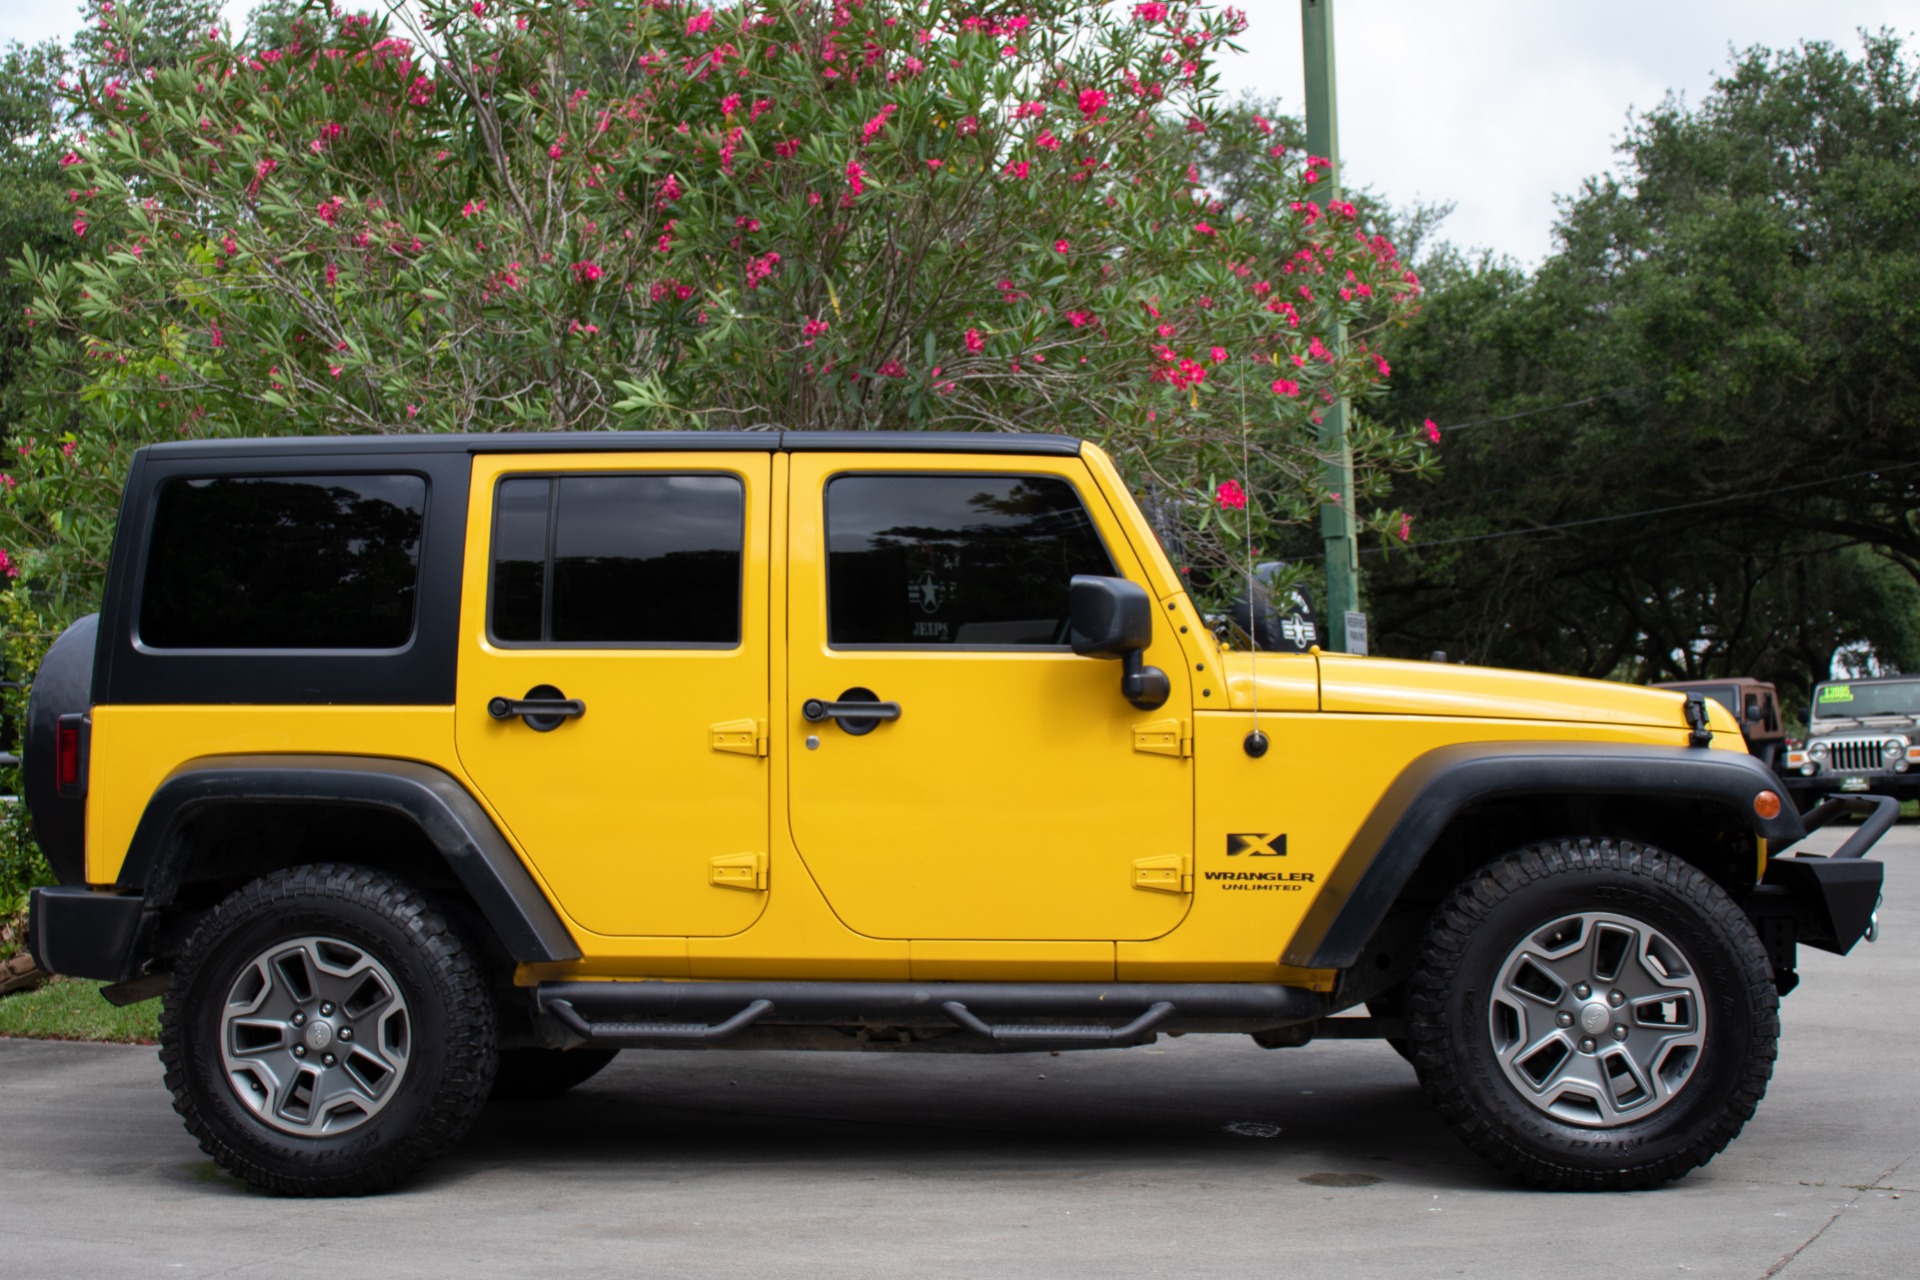 Used 2008 Jeep Wrangler Unlimited X For Sale ($16,995) | Select Jeeps Inc.  Stock #511448